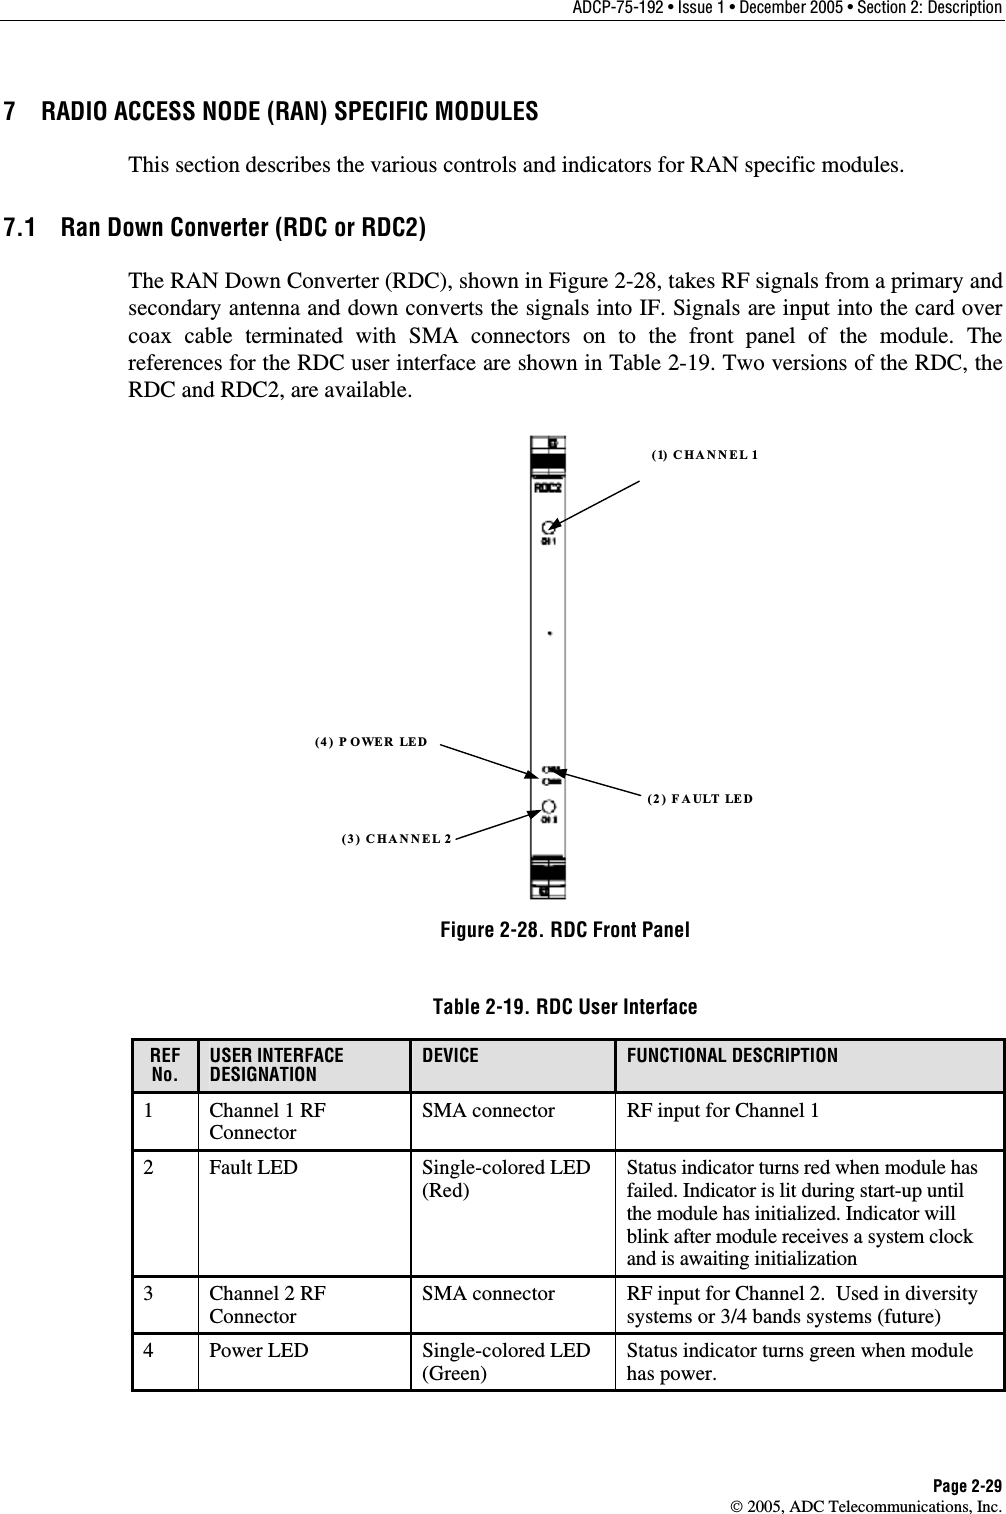 ADCP-75-192 • Issue 1 • December 2005 • Section 2: Description Page 2-29  2005, ADC Telecommunications, Inc. 7  RADIO ACCESS NODE (RAN) SPECIFIC MODULES This section describes the various controls and indicators for RAN specific modules. 7.1  Ran Down Converter (RDC or RDC2) The RAN Down Converter (RDC), shown in Figure 2-28, takes RF signals from a primary and secondary antenna and down converts the signals into IF. Signals are input into the card over coax cable terminated with SMA connectors on to the front panel of the module. The references for the RDC user interface are shown in Table 2-19. Two versions of the RDC, the RDC and RDC2, are available. (2) FAULT LED(4) P OWER LED(3) CHANNEL 2(1) CHANNEL 1 Figure 2-28. RDC Front Panel Table 2-19. RDC User Interface REF No. USER INTERFACE DESIGNATION DEVICE  FUNCTIONAL DESCRIPTION 1  Channel 1 RF Connector SMA connector  RF input for Channel 1 2 Fault LED  Single-colored LED (Red) Status indicator turns red when module has failed. Indicator is lit during start-up until the module has initialized. Indicator will blink after module receives a system clock and is awaiting initialization 3  Channel 2 RF Connector SMA connector  RF input for Channel 2.  Used in diversity systems or 3/4 bands systems (future) 4 Power LED  Single-colored LED (Green)  Status indicator turns green when module has power.  